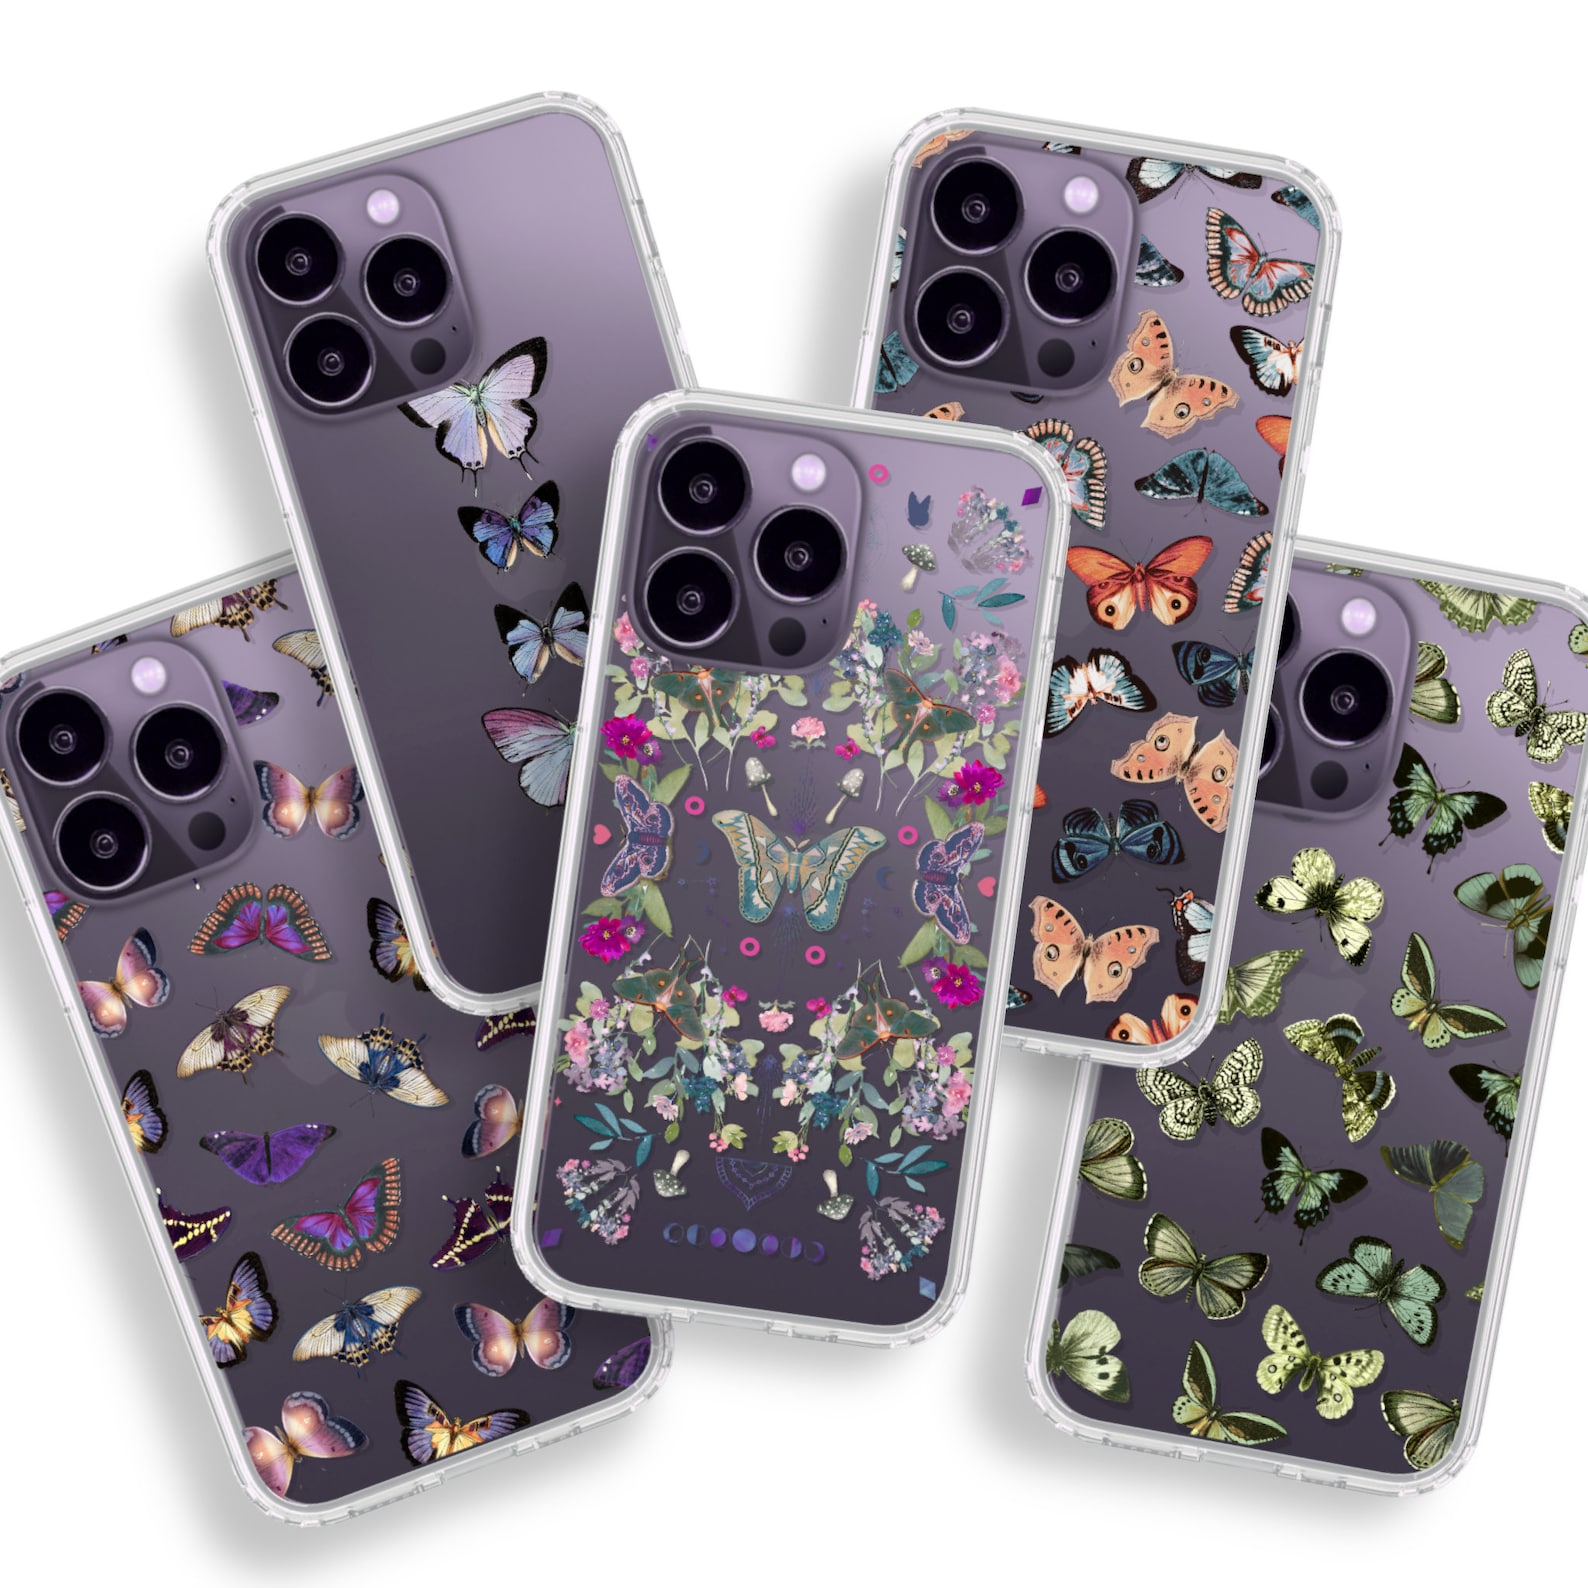 Best Phone Cases for New Deep Purple Iphone 14 Pro and 14 Pro - Etsy